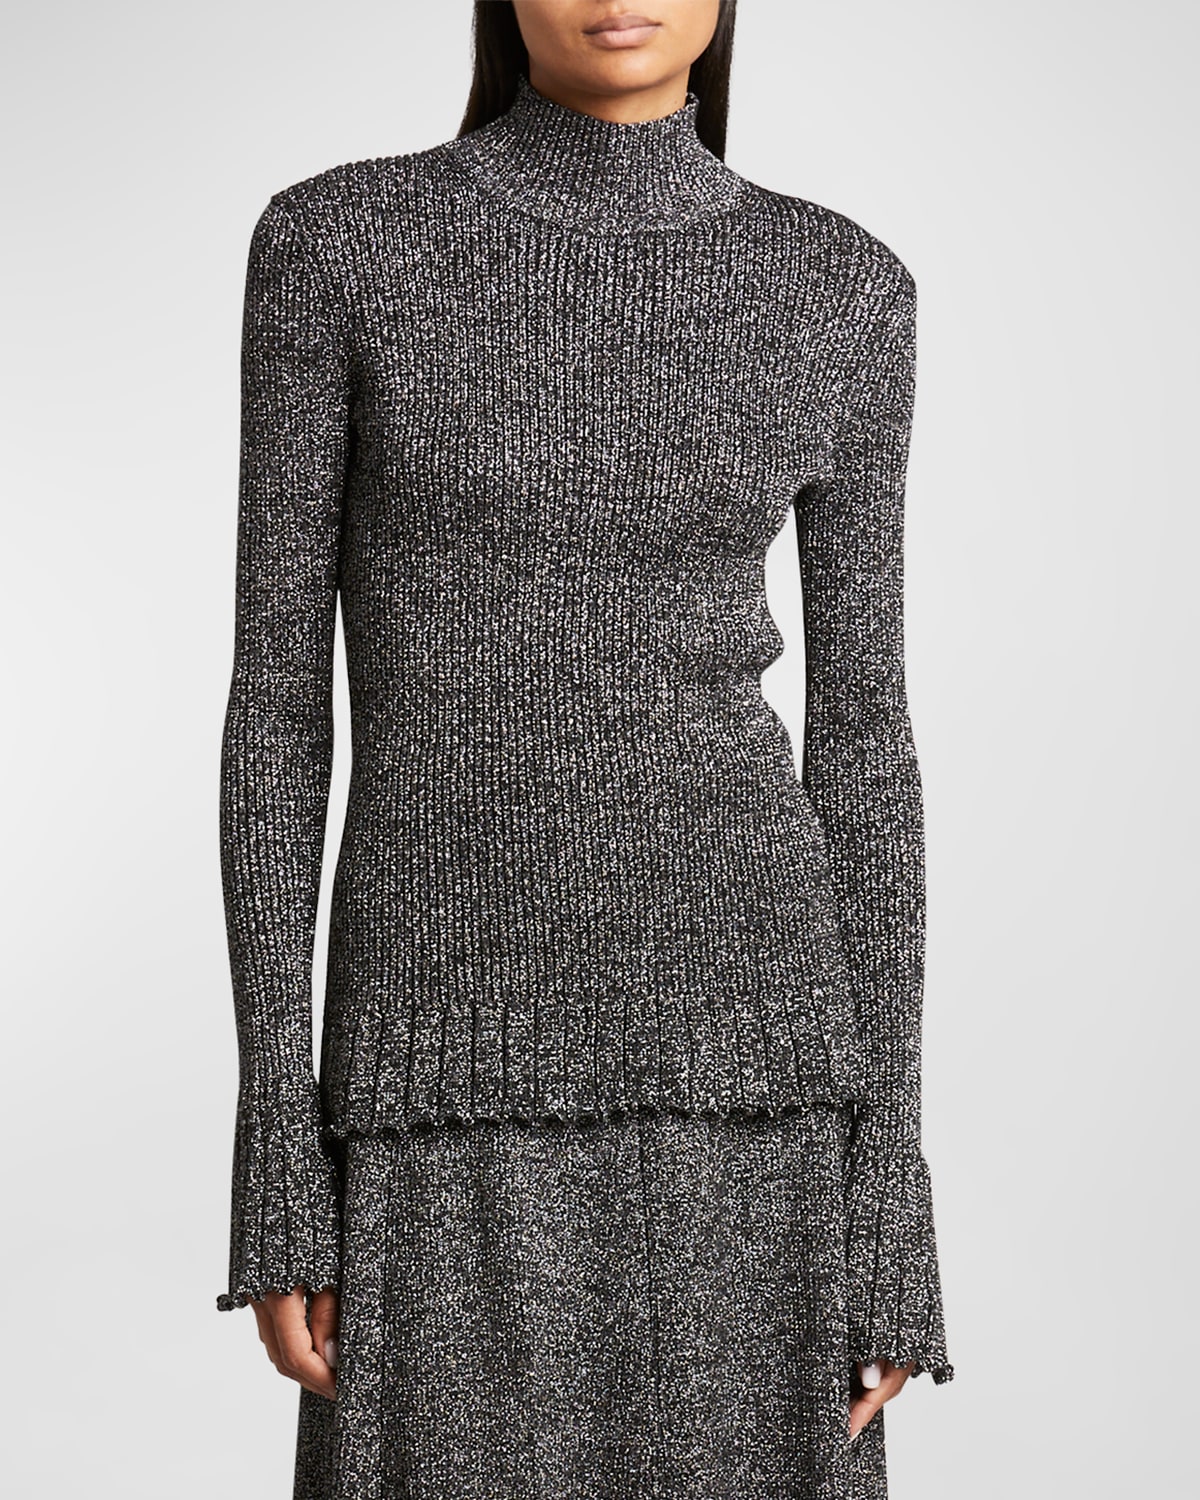 Shop Proenza Schouler White Label Avery Sparkly Knit Turtleneck Top In Black/silver